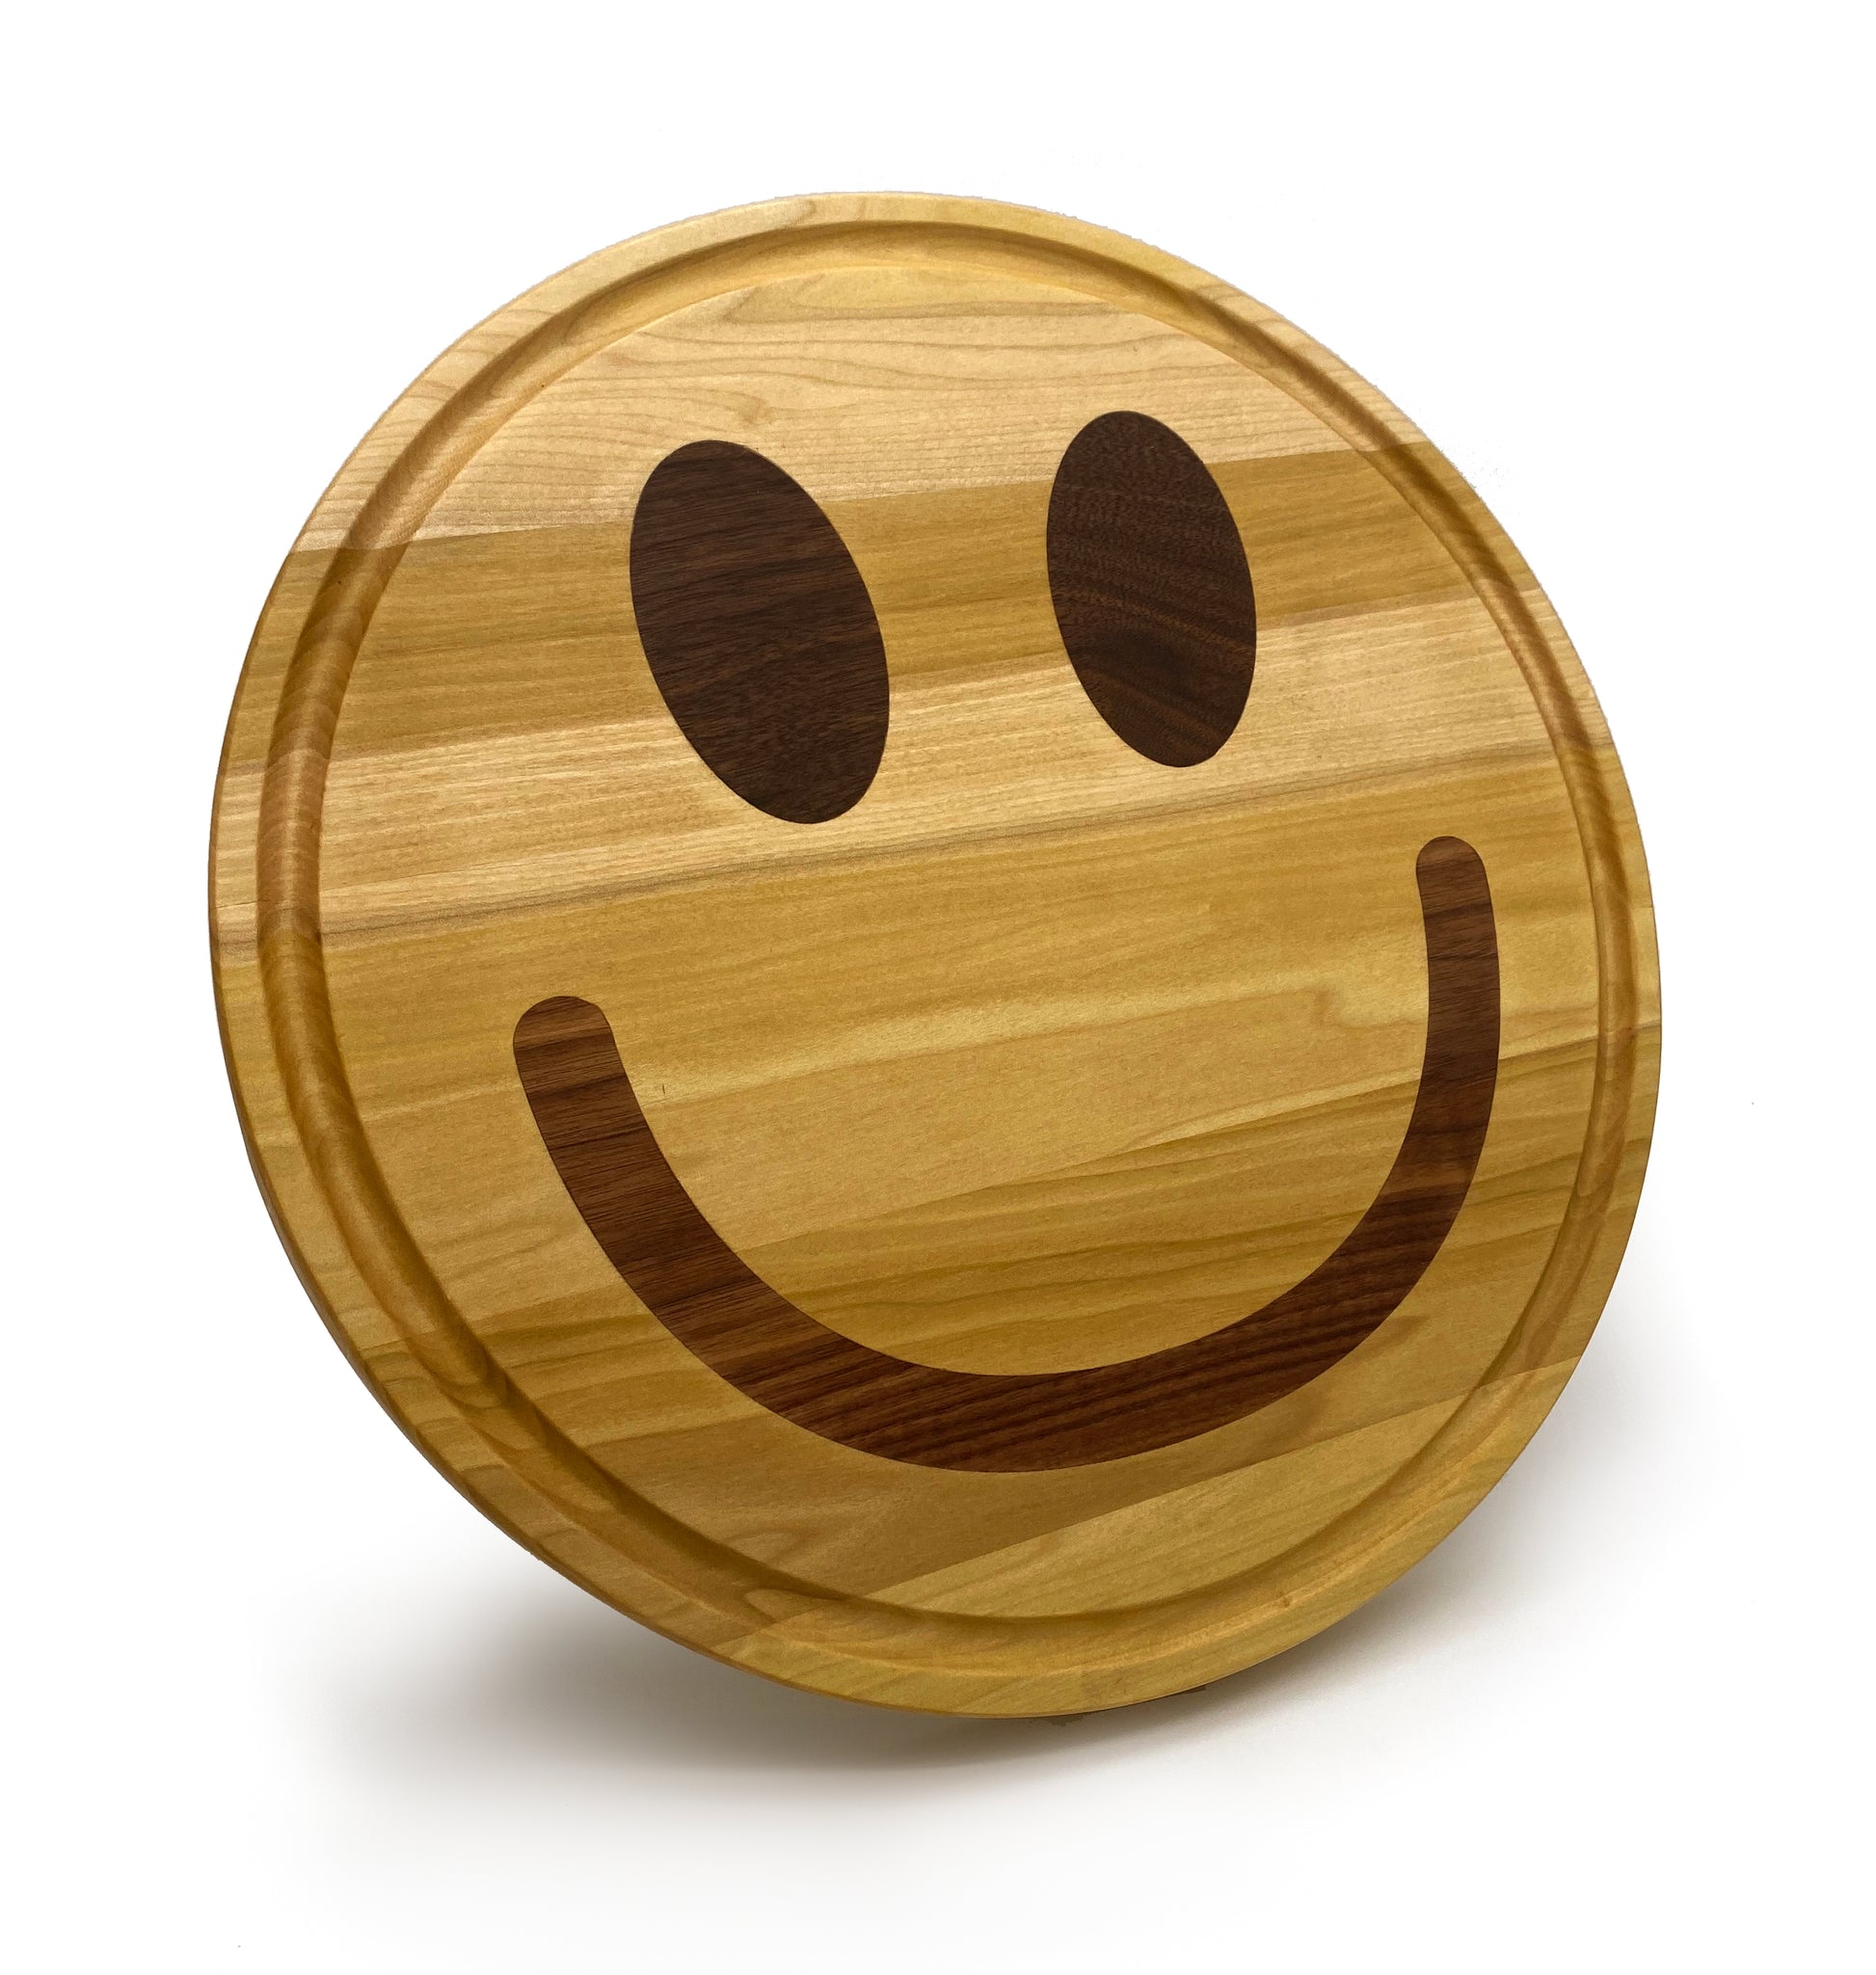 smiley face shapes cutting board made of poplar